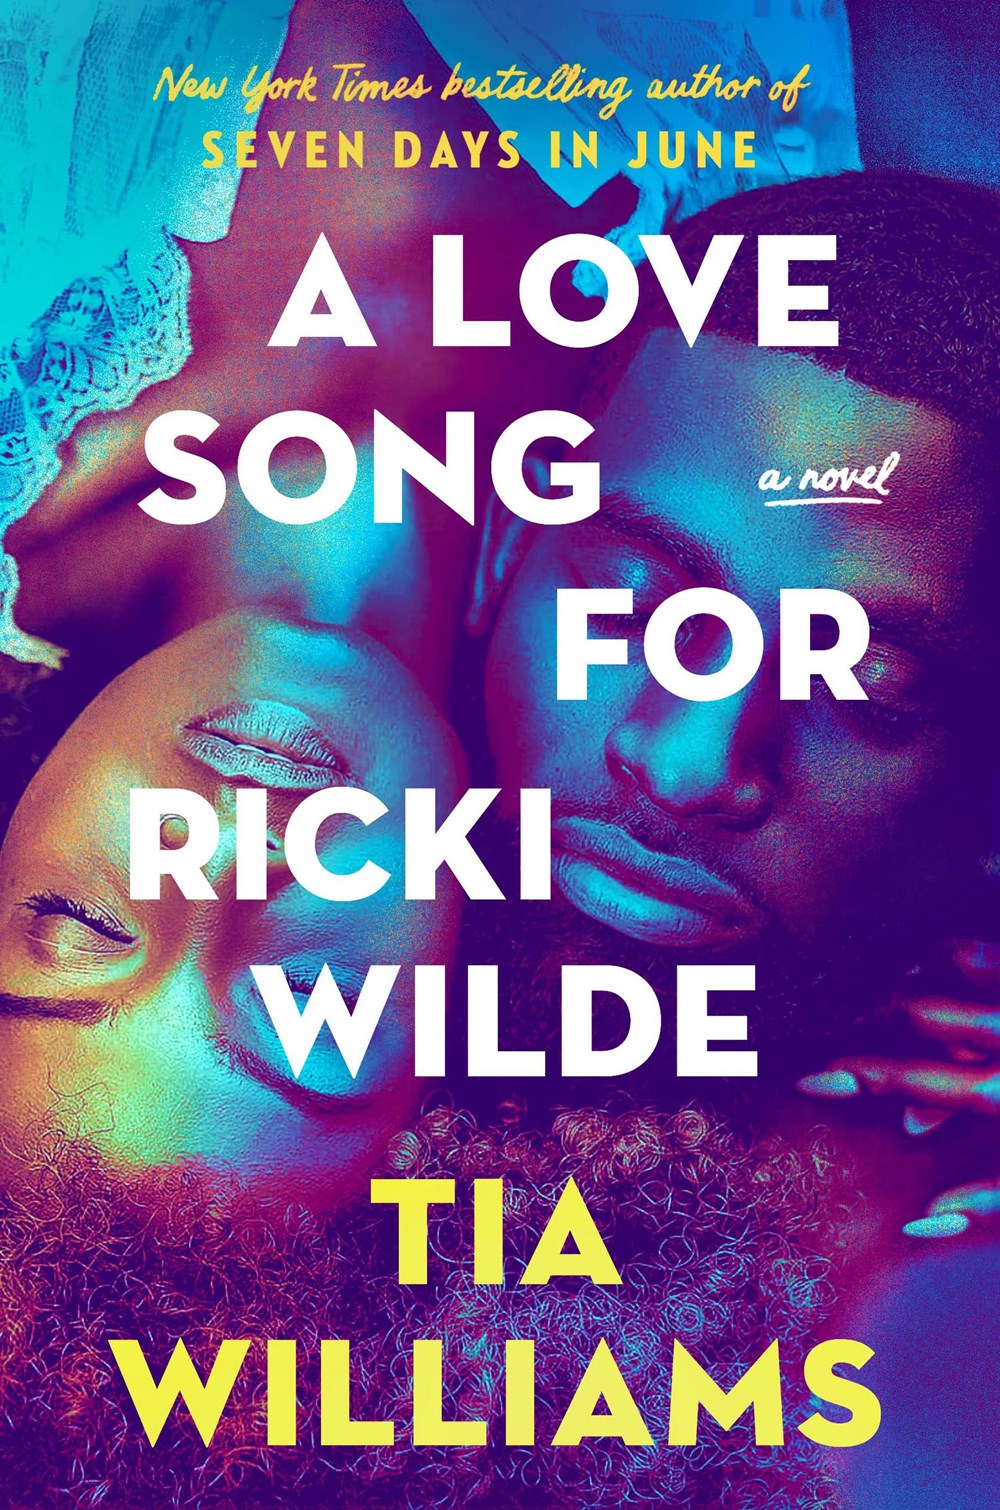 A Love Song for Ricki Wilde by Tia Williams (Hardcover) (PREORDER)